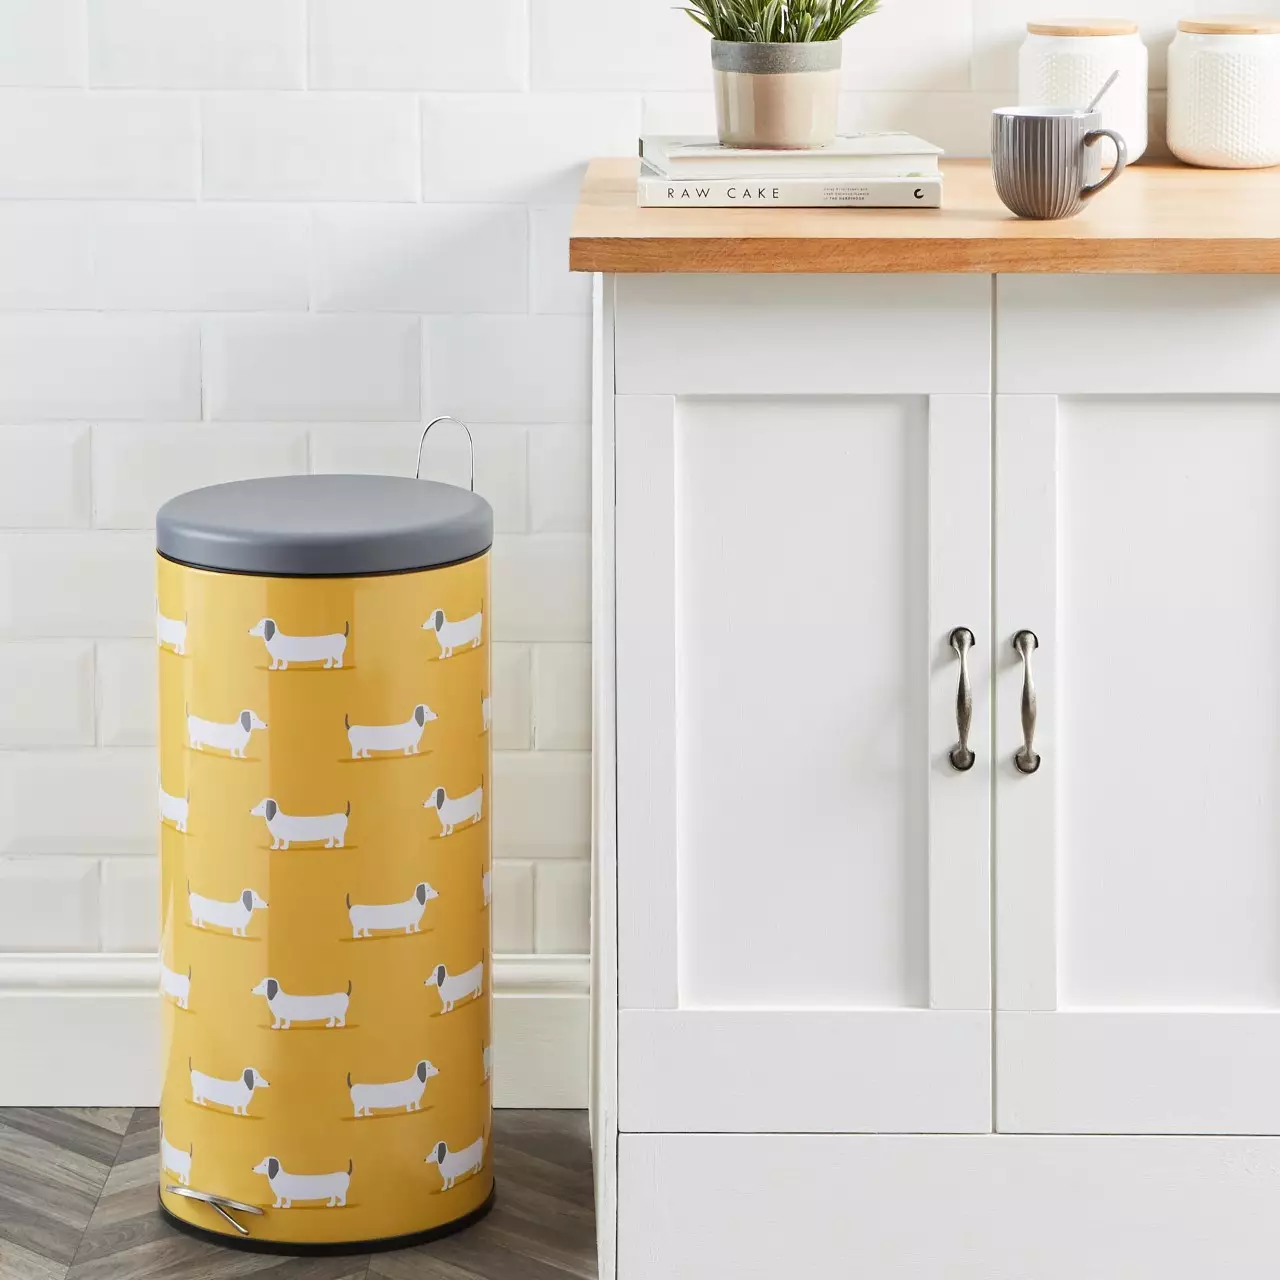 The 30 litre pedal bin is priced at £25 (